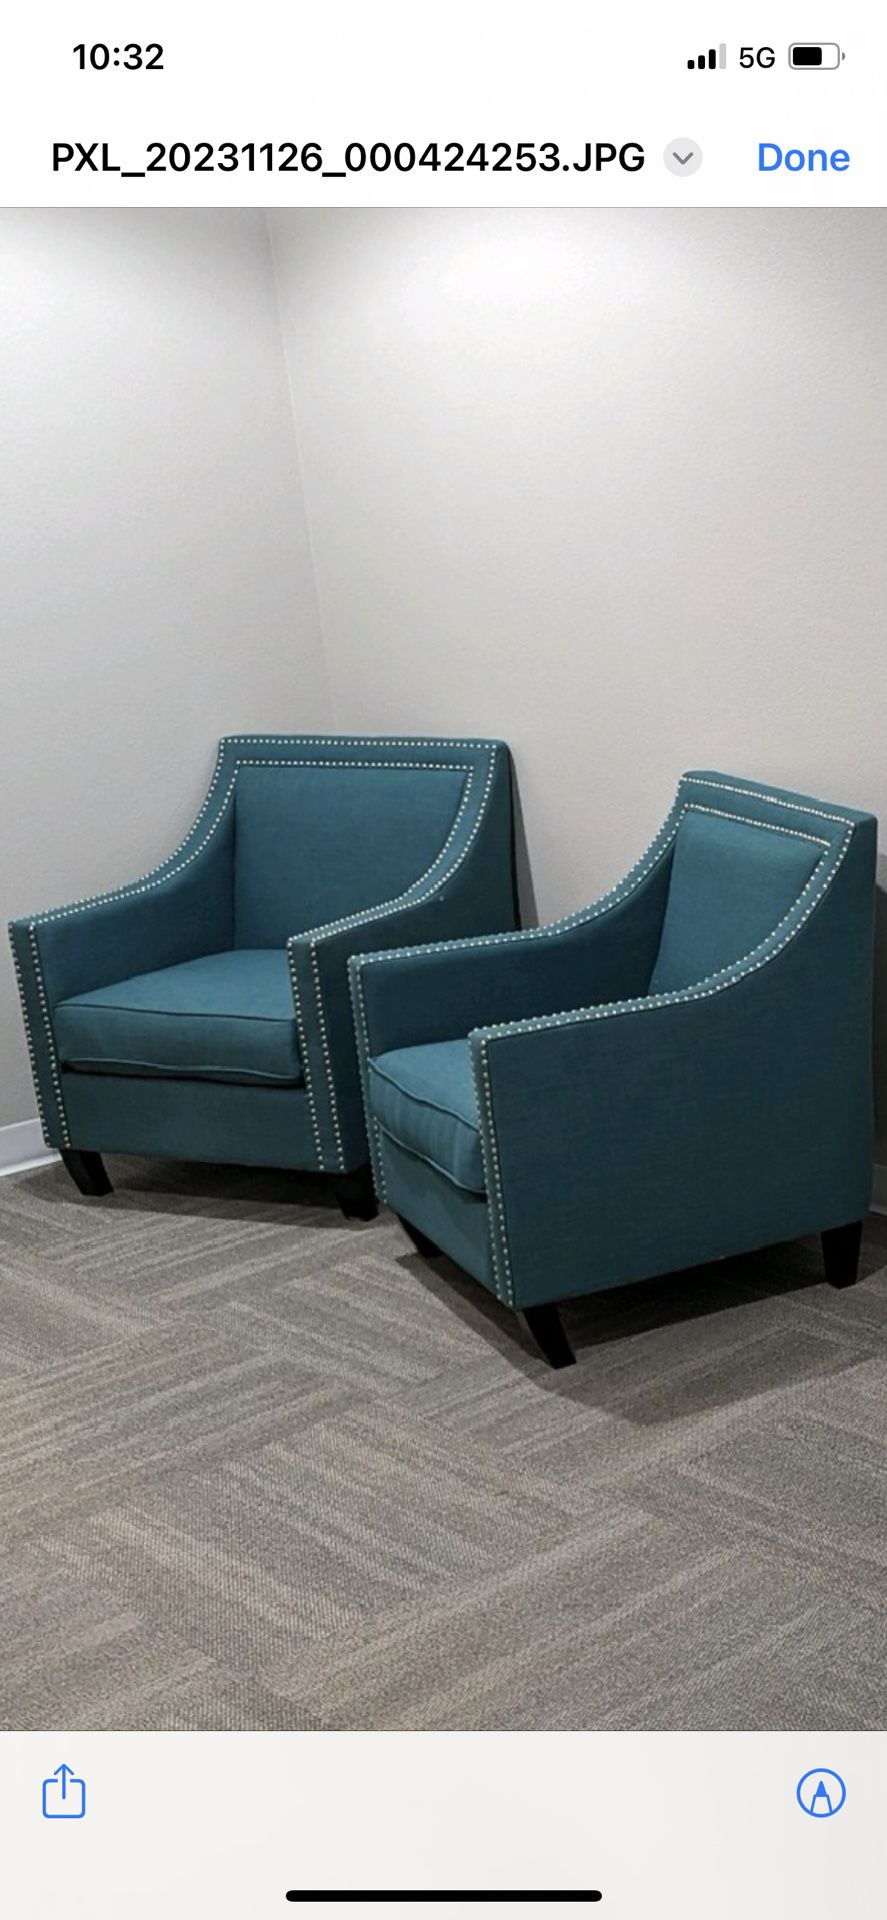 2 Teal Chairs